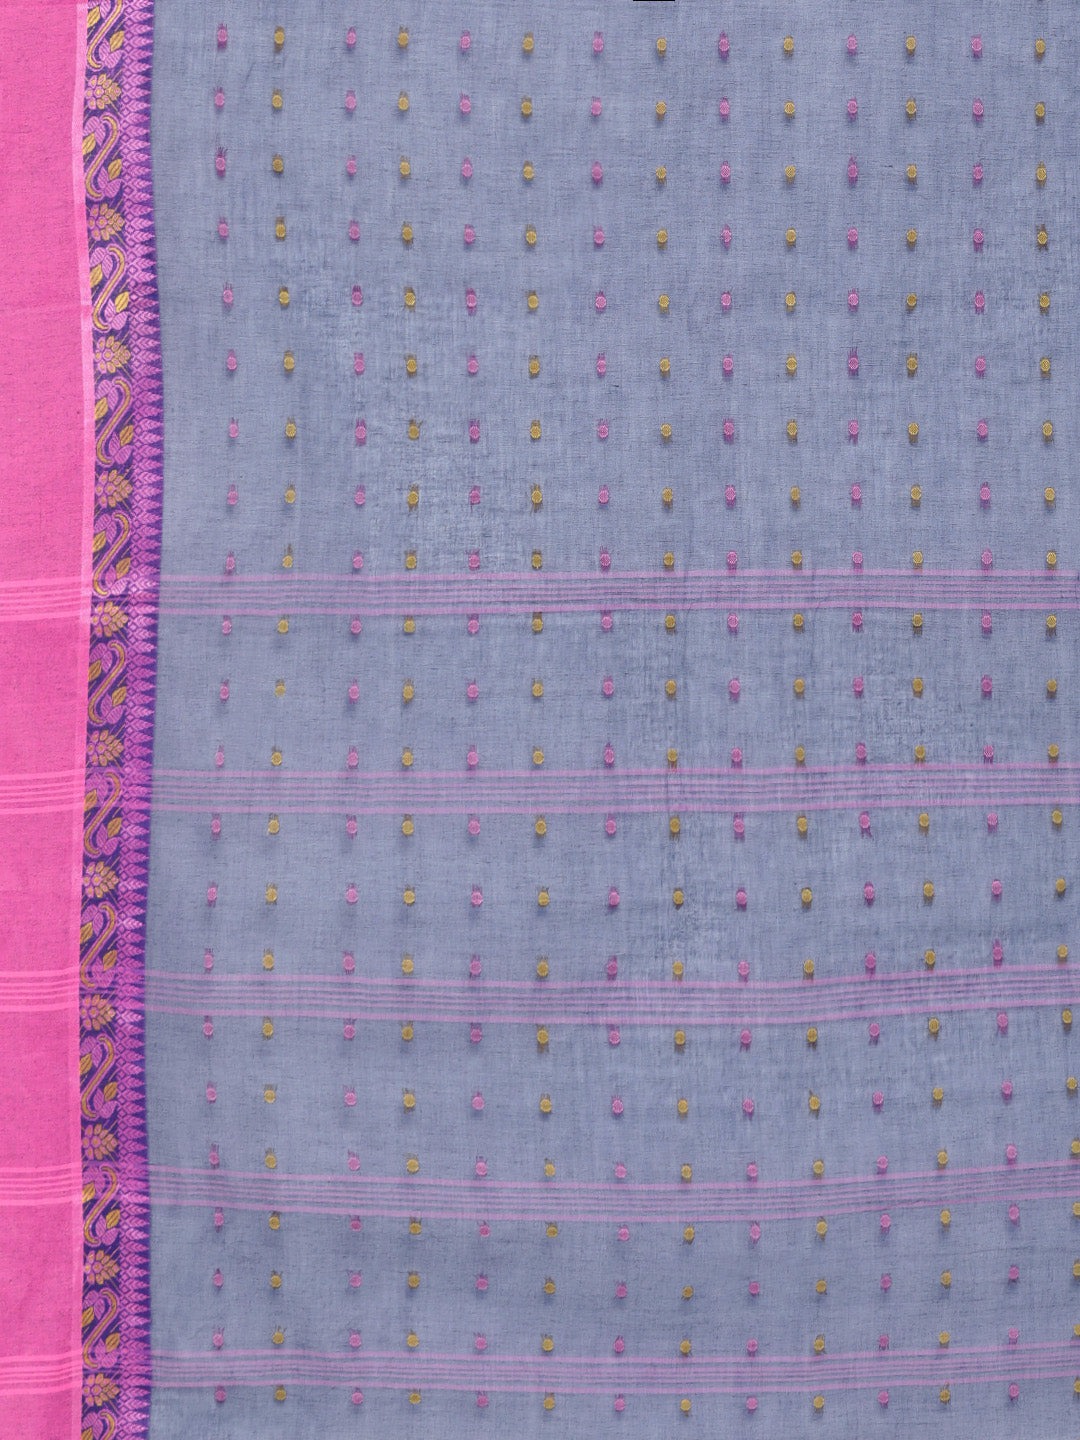 Purple Tant Woven Design Saree Without Blouse Piece DUTASA032 DUTASA032-Saree-Kalakari India-DUTASA032-Geographical Indication, Hand Crafted, Heritage Prints, Natural Dyes, Sarees, Silk Cotton, Sustainable Fabrics, Taant, Tant, West Bengal, Woven-[Linen,Ethnic,wear,Fashionista,Handloom,Handicraft,Indigo,blockprint,block,print,Cotton,Chanderi,Blue, latest,classy,party,bollywood,trendy,summer,style,traditional,formal,elegant,unique,style,hand,block,print, dabu,booti,gift,present,glamorous,affordab